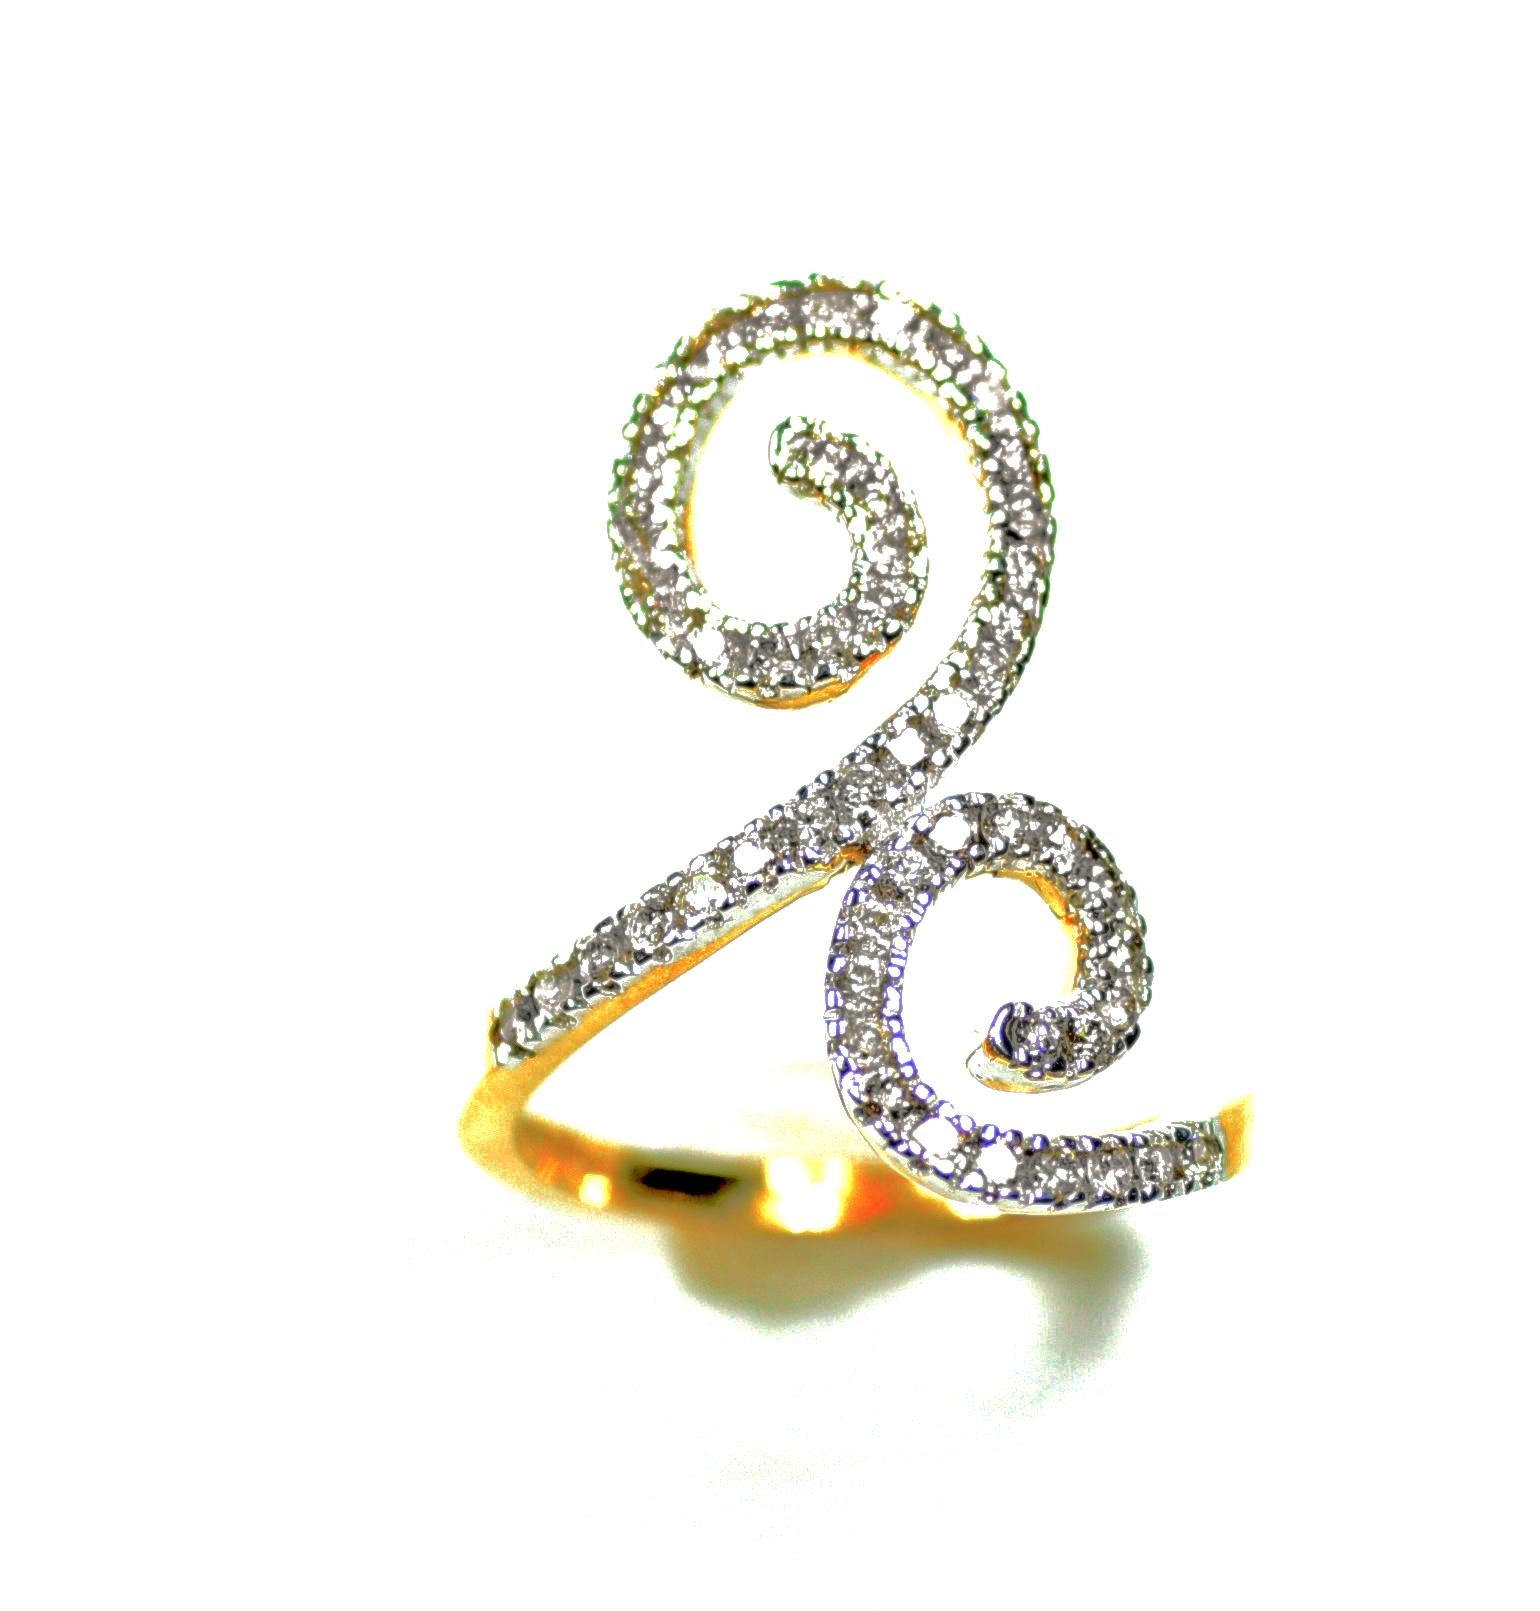 This Double Spiral Diamond statement ring in 18k yellow gold and 0.53 ct of sparkling diamonds wraps around your finger creating an icy look.
Most of our jewels are made to order, so please allow us for a 2-4 week delivery.
Please note the